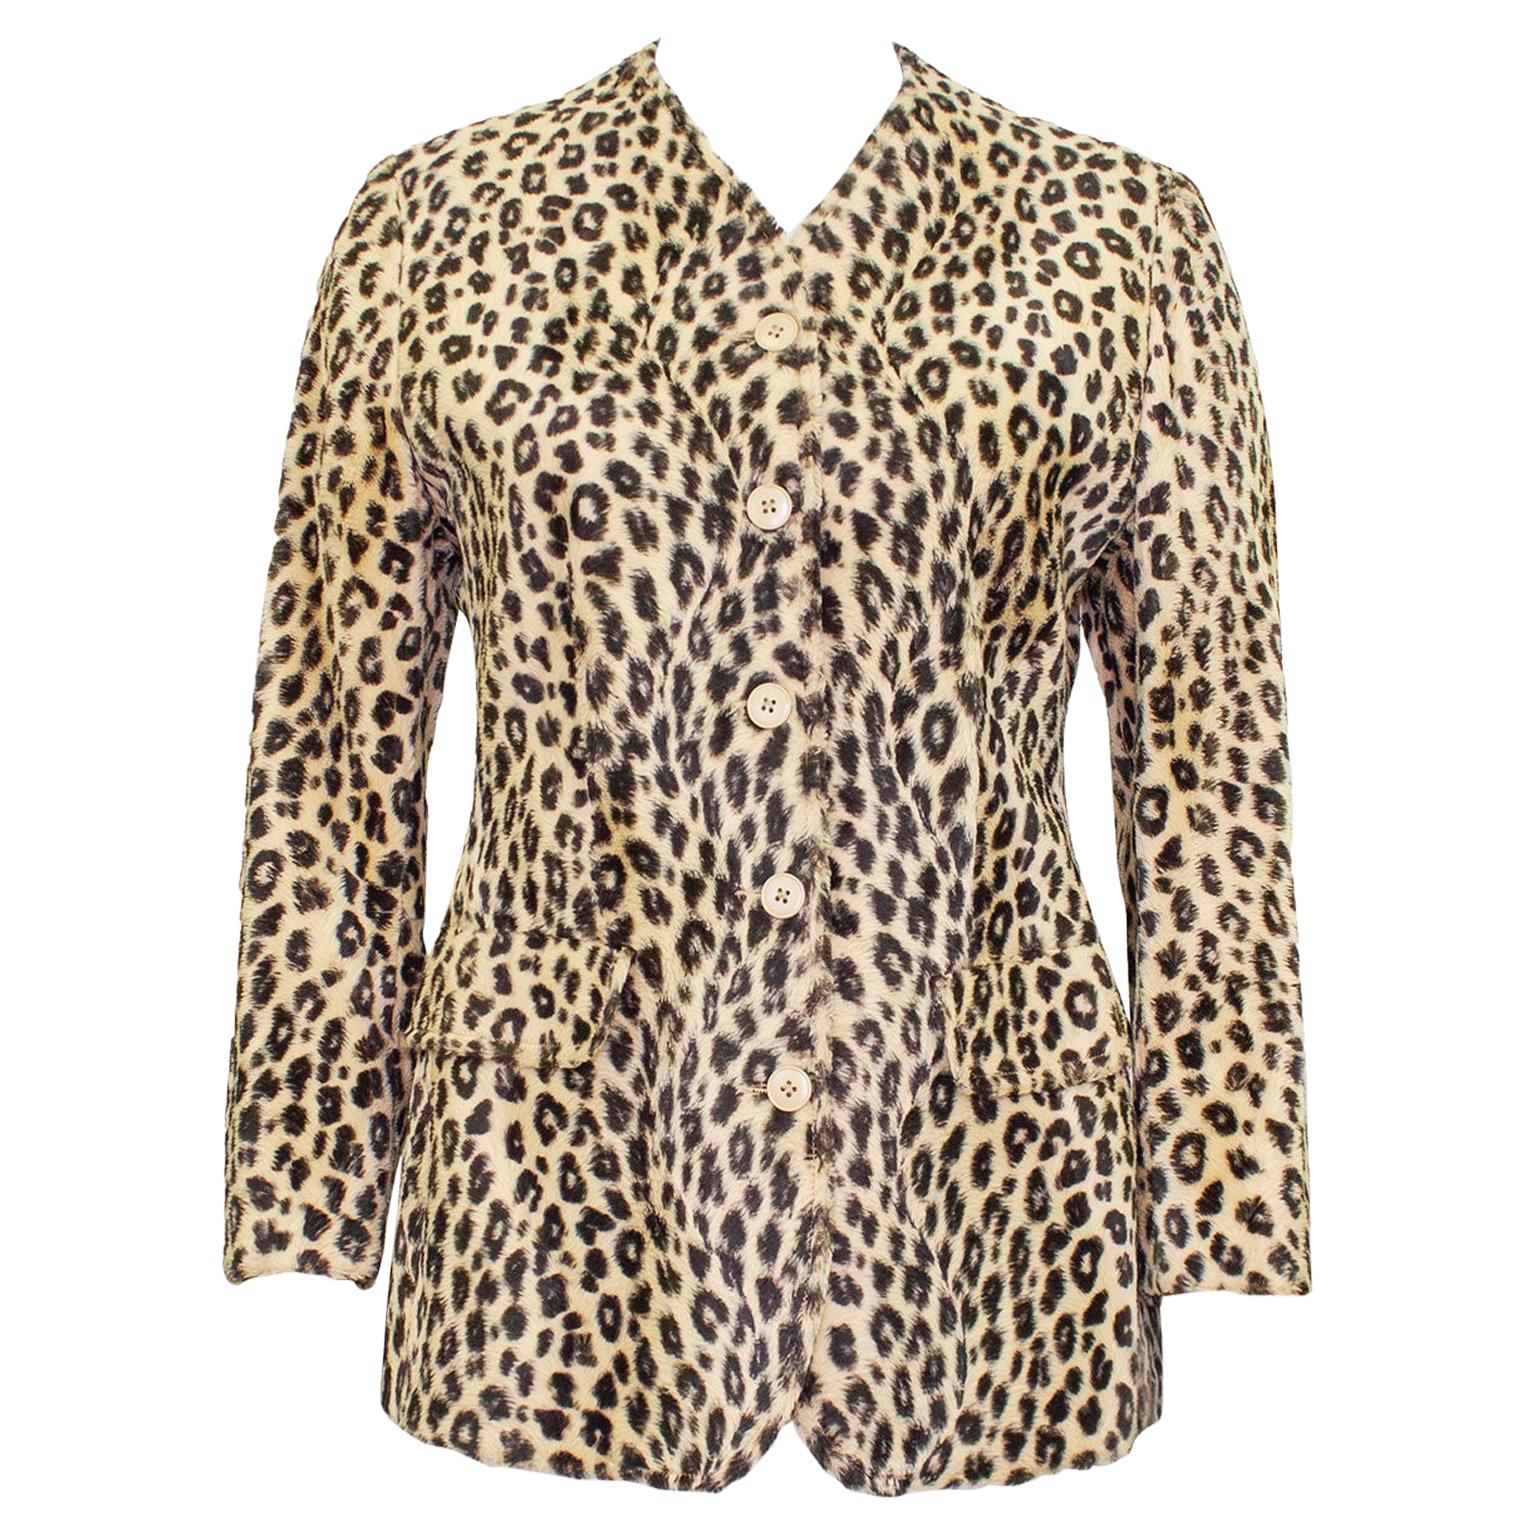 1980s Kenzo Leopard Faux Fur Collarless Jacket  For Sale